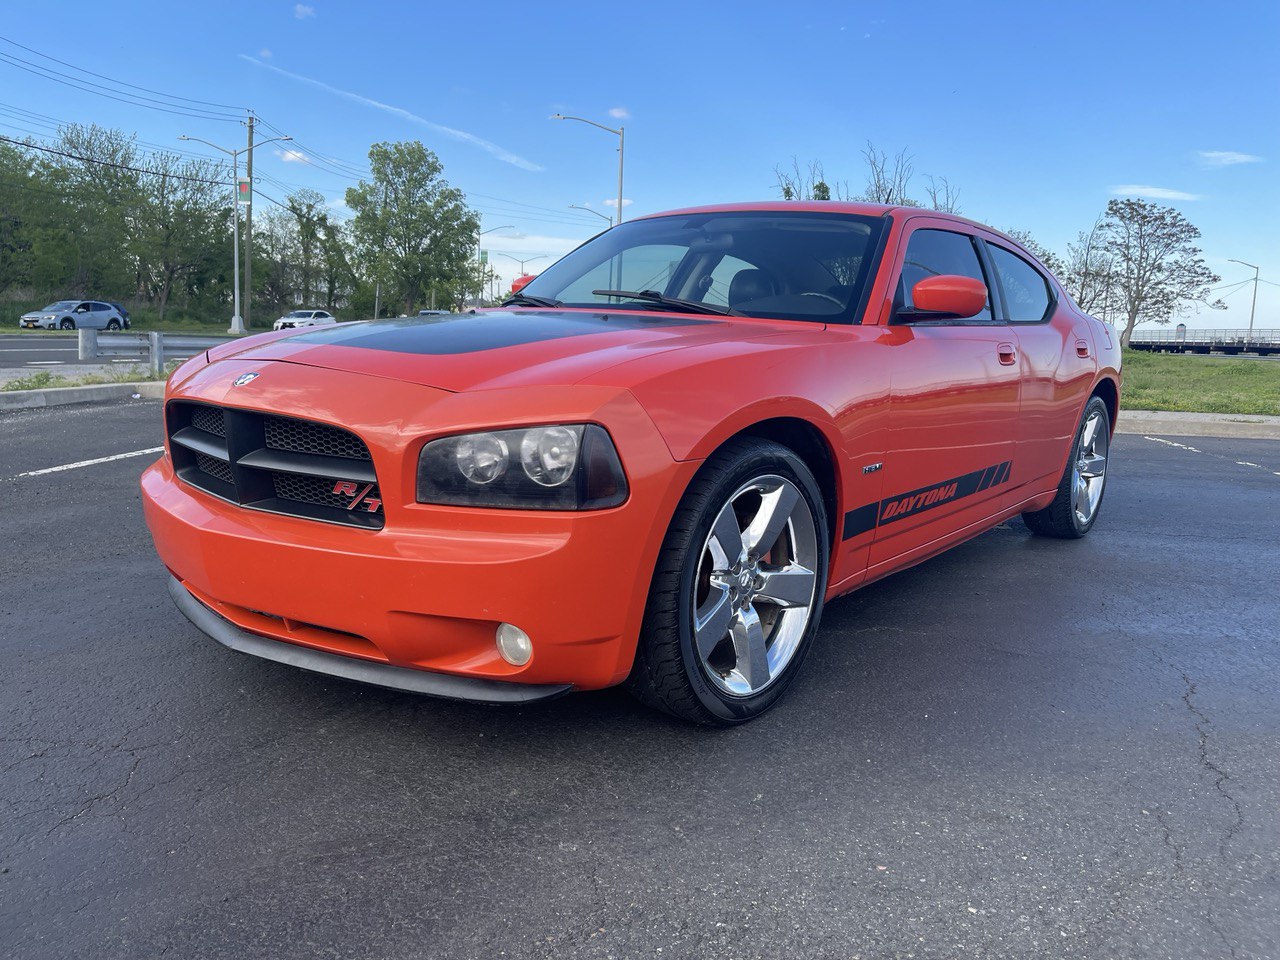 Used Car - 2008 Dodge Charger RT for Sale in Staten Island, NY